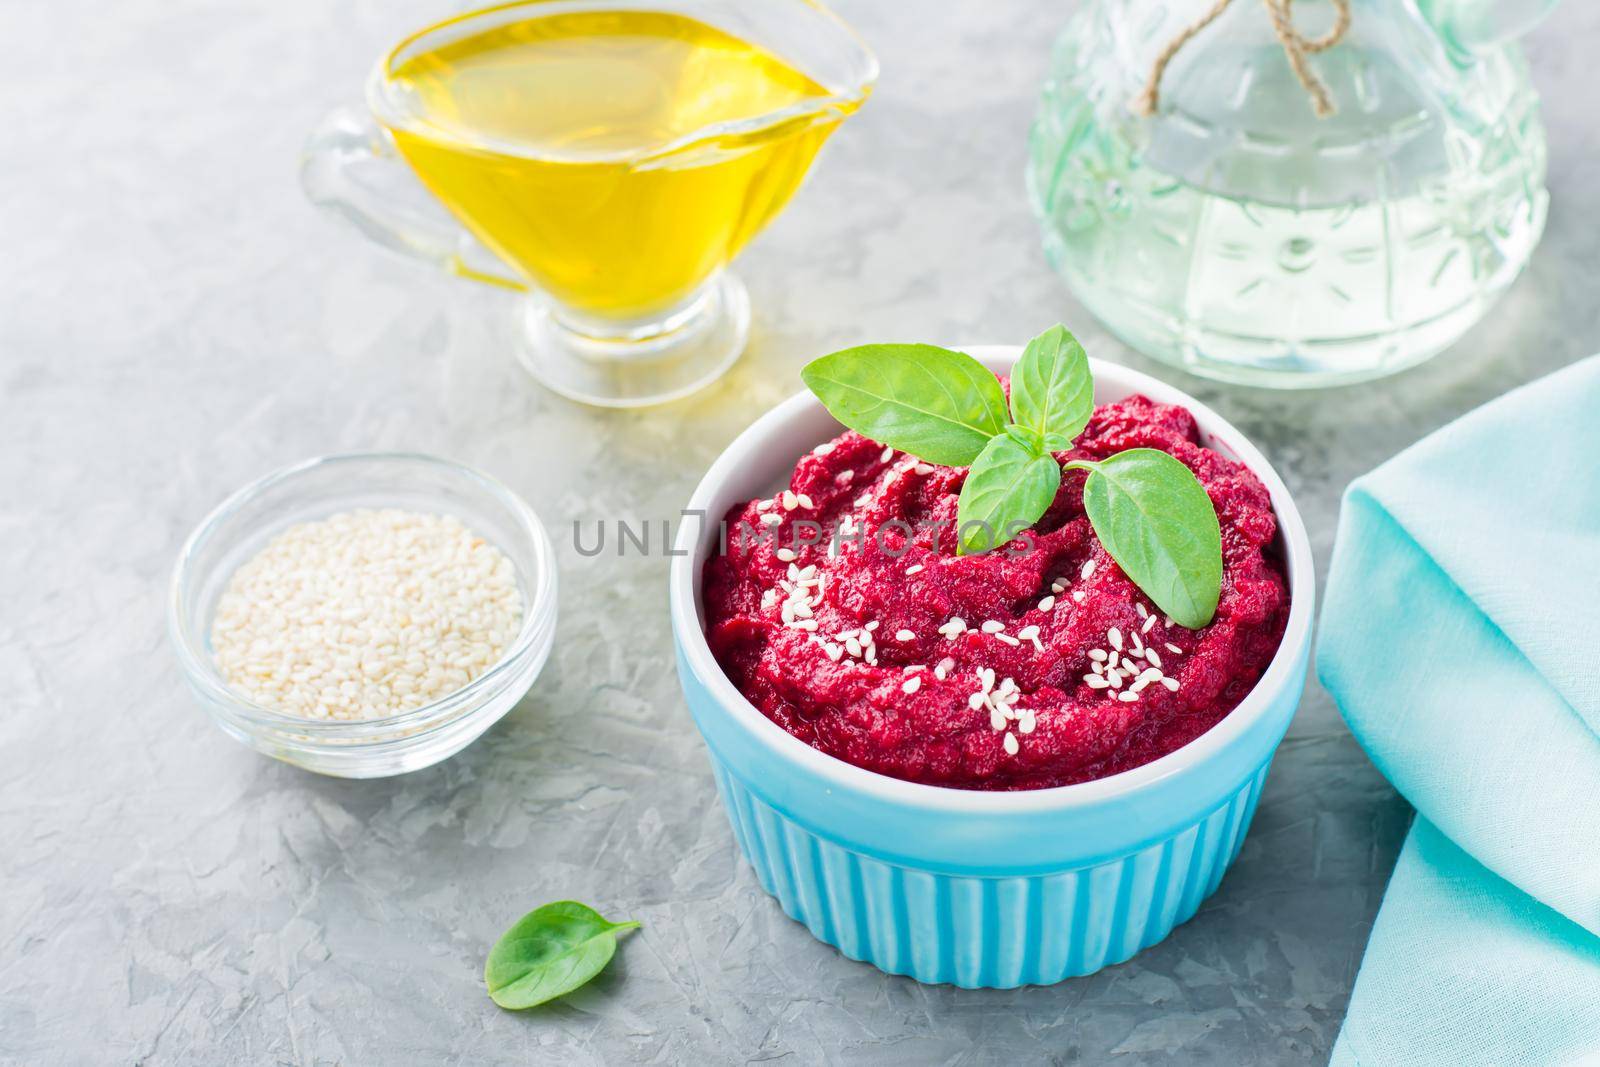 Baked beet hummus in a bowl with sesame seeds and basil on the table